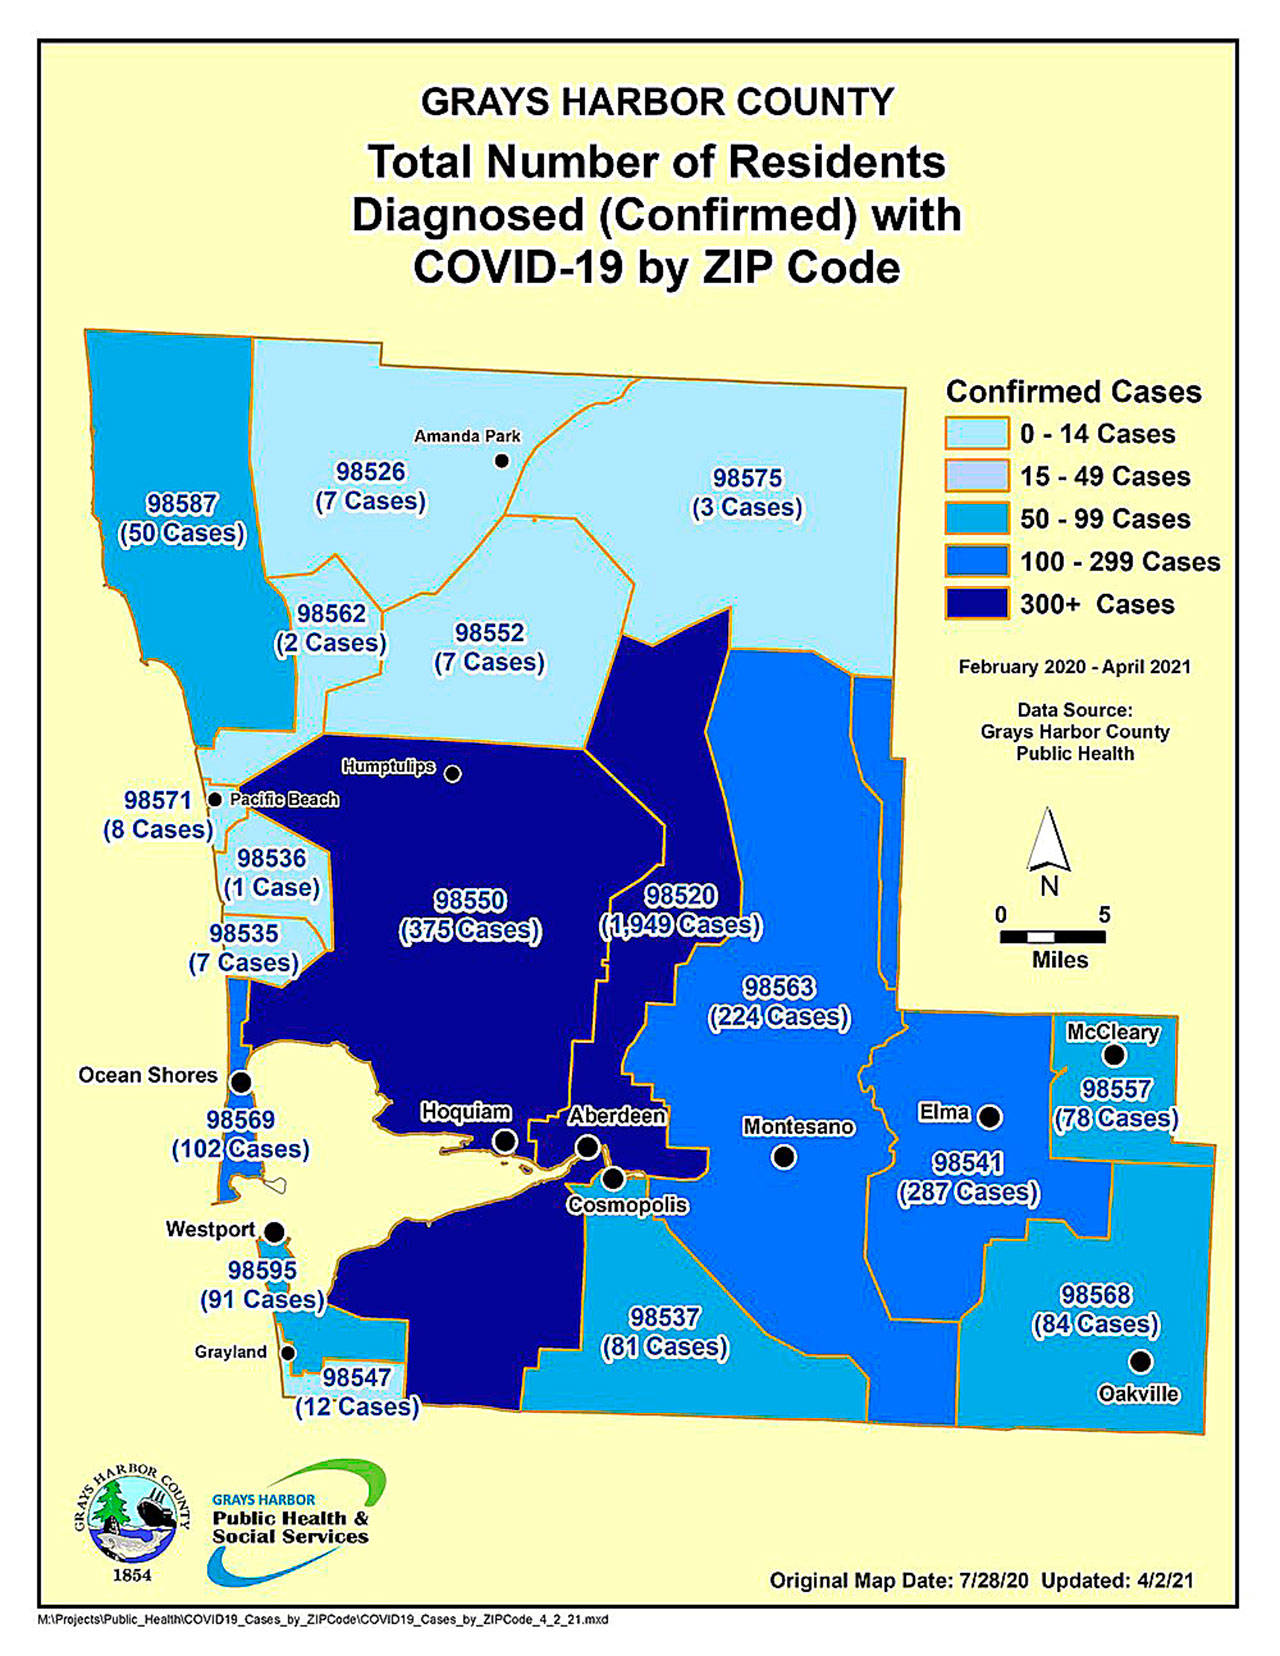 COVID-19 cases over the course of the pandemic by zip code. Grays Harbor County Public Health updated the map Friday.